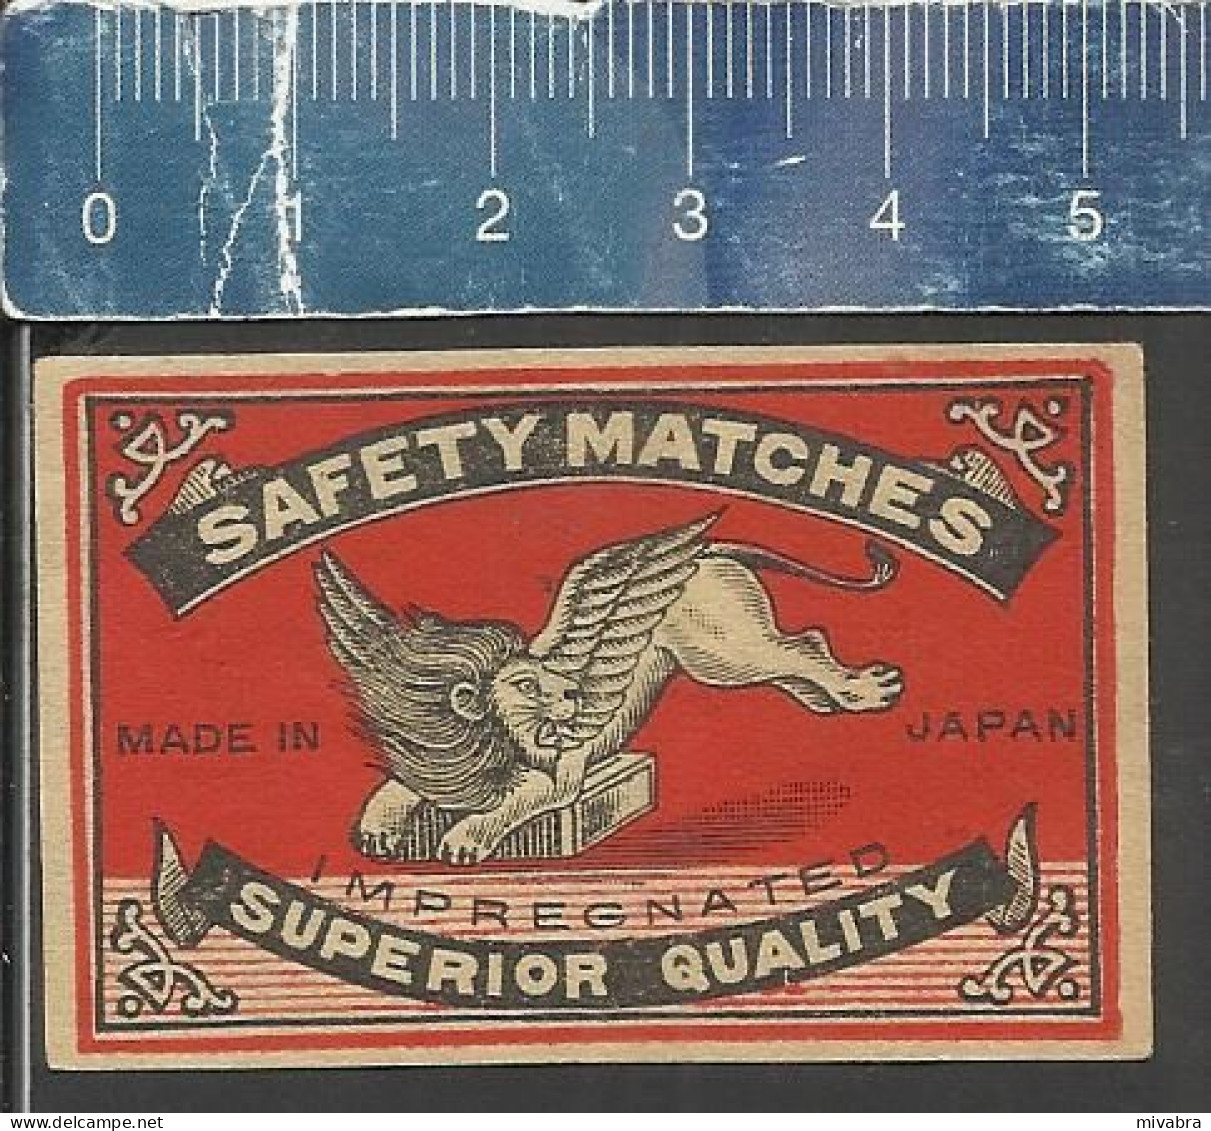 WINGED LION WITH WINGS SAFETY MATCHES IMPREGNATED SUPERIOR QUALITY - OLD VINTAGE MATCHBOX LABEL MADE JAPAN - Luciferdozen - Etiketten